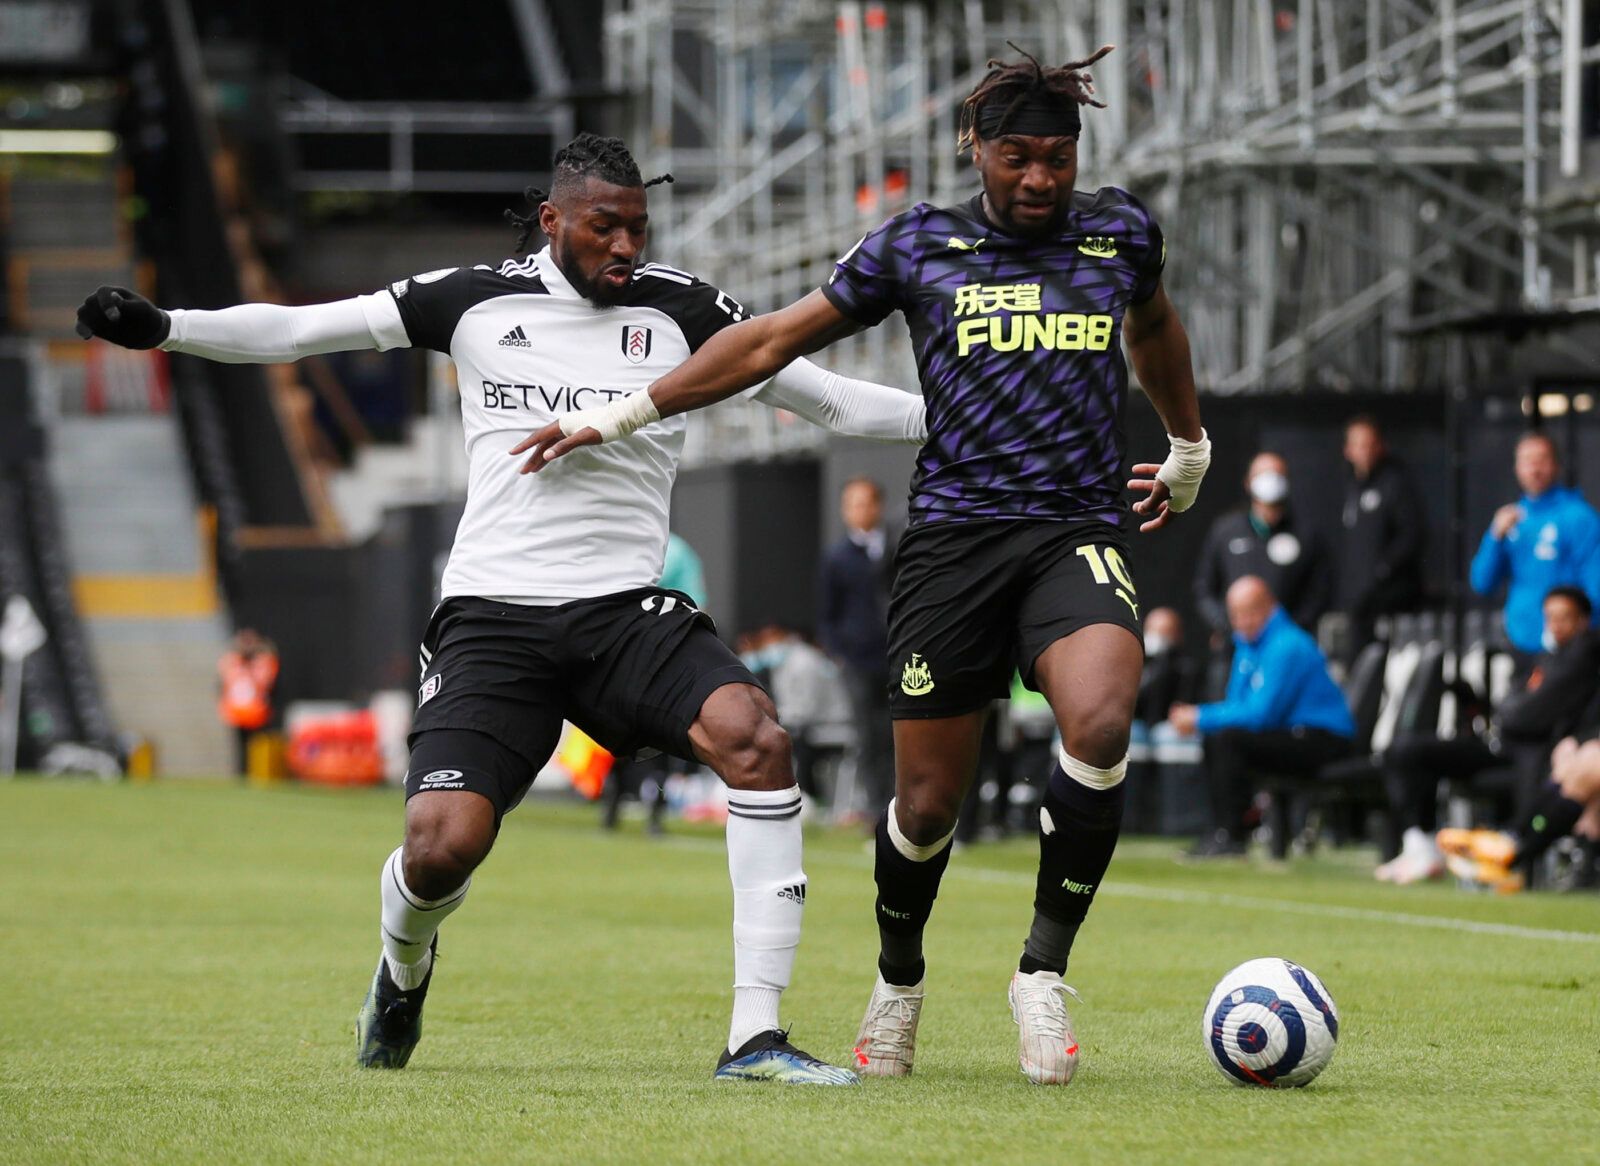 Soccer Football - Premier League - Fulham v Newcastle United - Craven Cottage, London, Britain - May 23, 2021 Fulham's Andre-Frank Zambo Anguissa in action with Newcastle United's Allan Saint-Maximin Pool via REUTERS/Matthew Childs EDITORIAL USE ONLY. No use with unauthorized audio, video, data, fixture lists, club/league logos or 'live' services. Online in-match use limited to 75 images, no video emulation. No use in betting, games or single club /league/player publications.  Please contact you